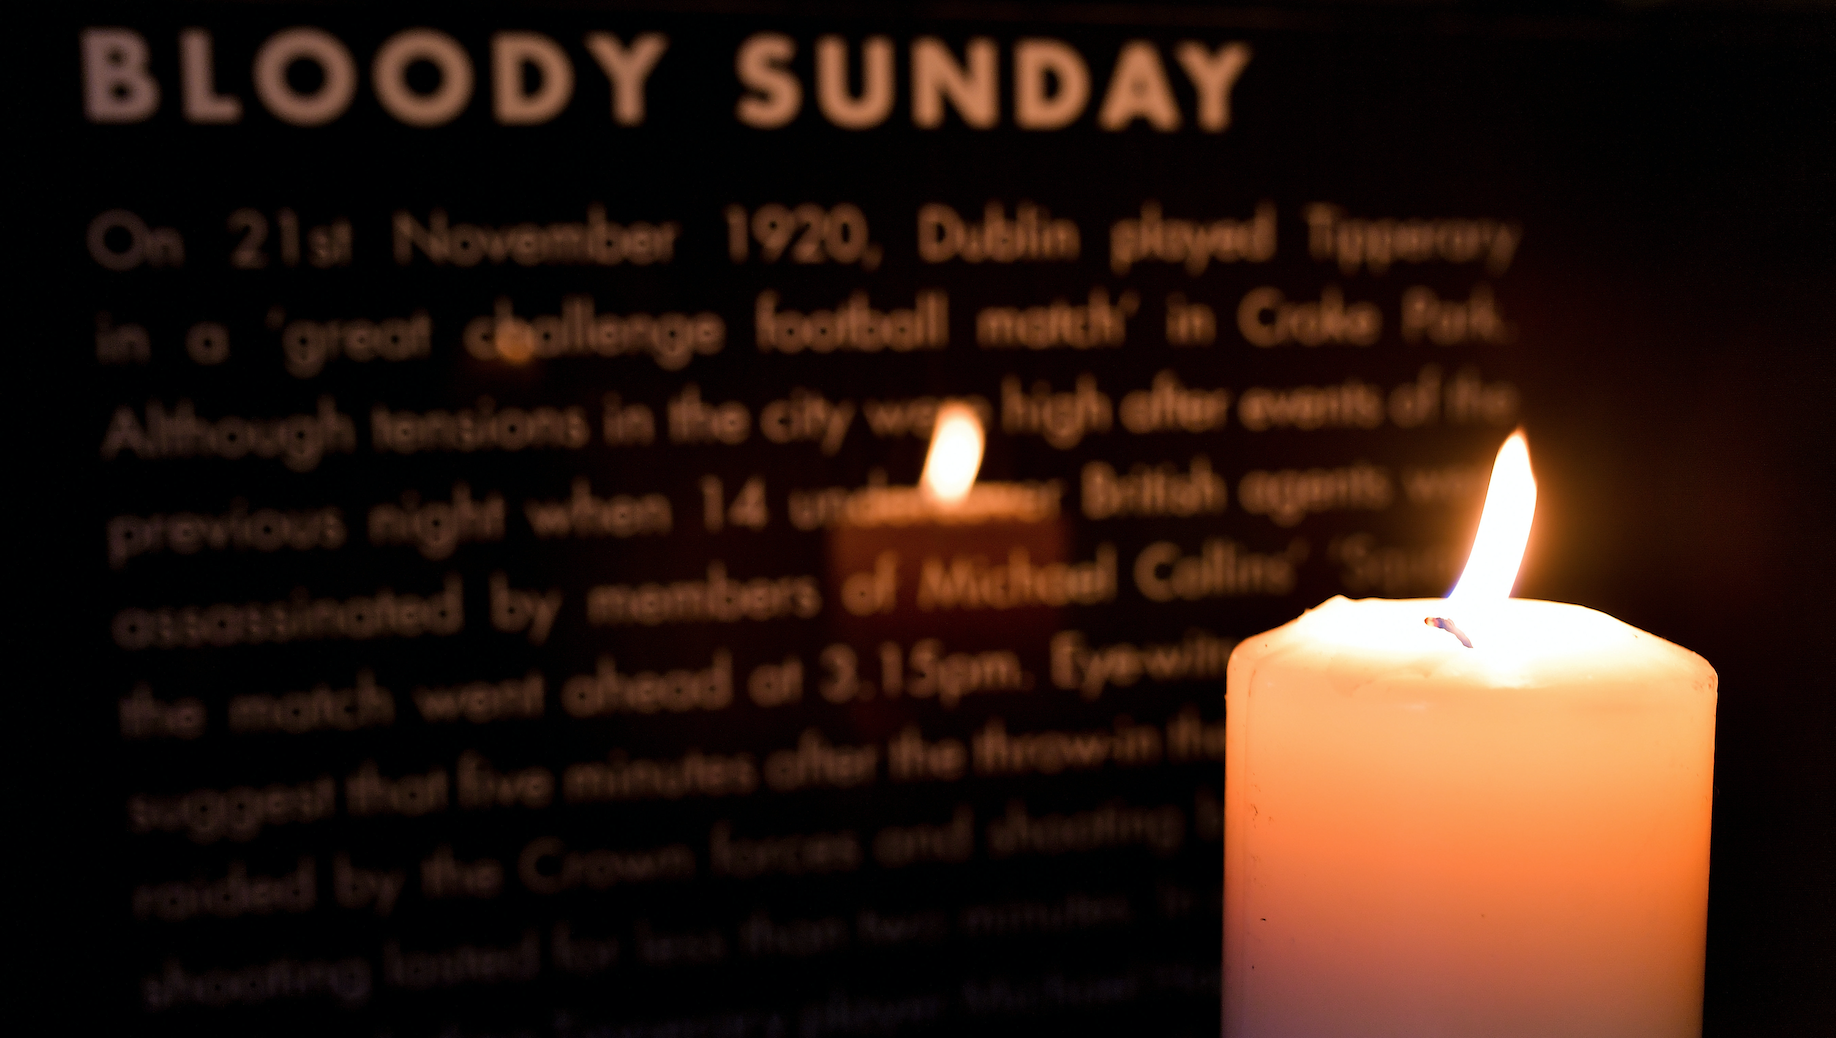 B100dy Sunday – A candle at dusk